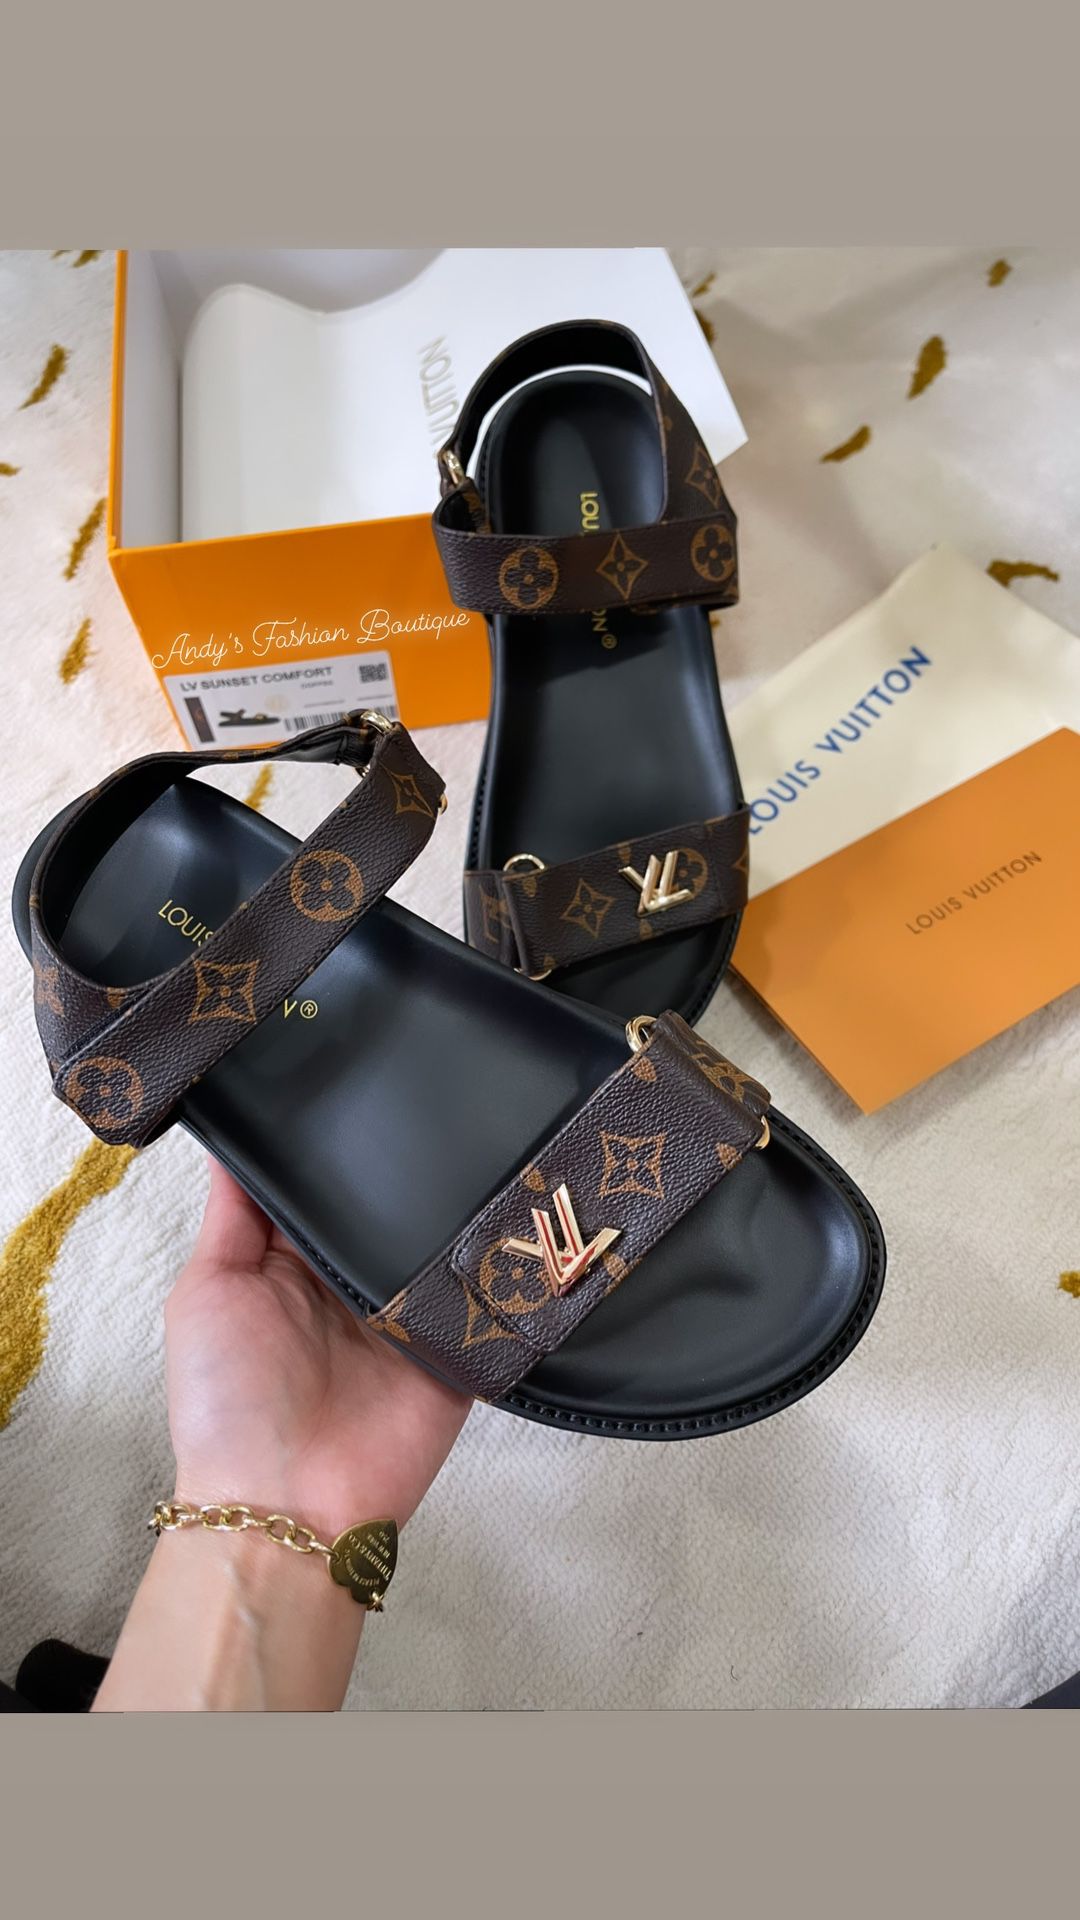 Louis Vuitton Slides for Sale in Brooklyn, NY - OfferUp #louis